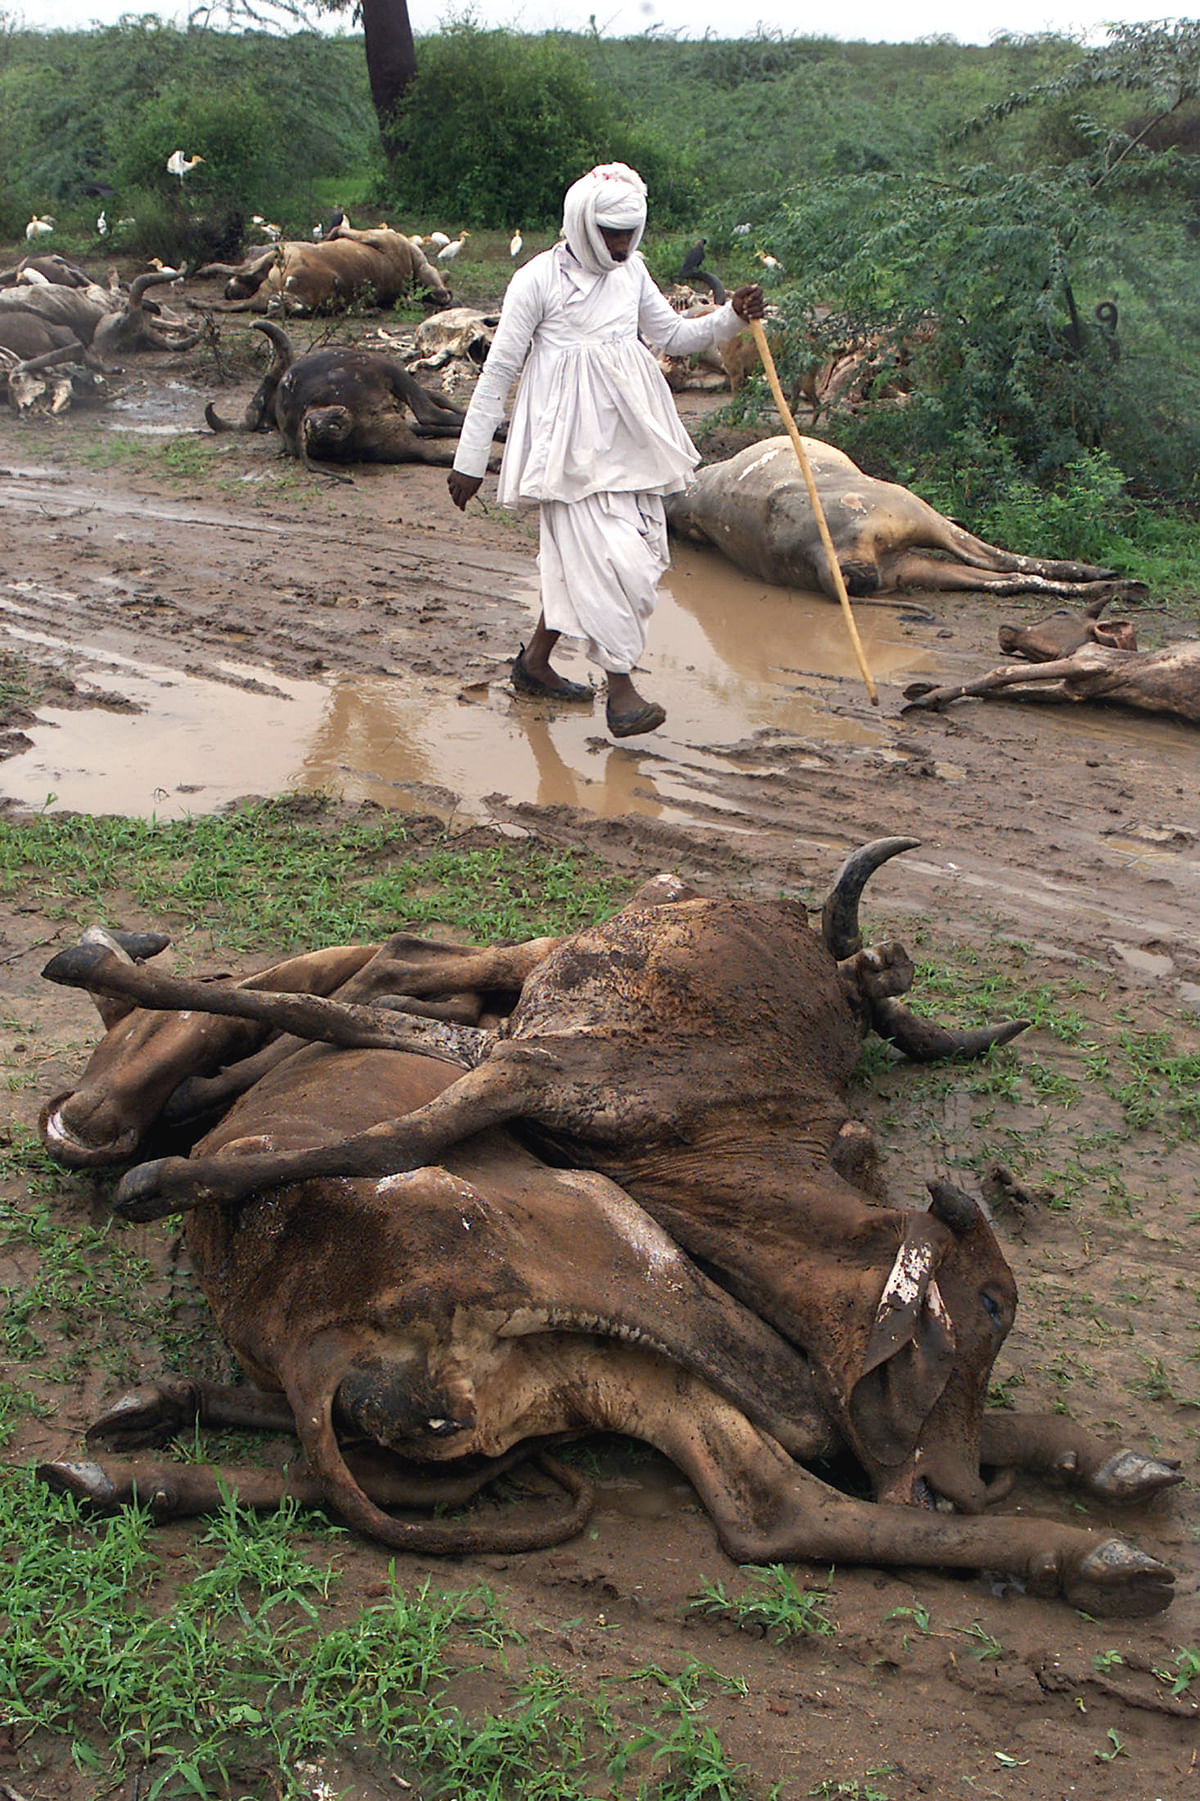 In the largest moment of lower caste unity, Dalits refused to dispose off cow carcasses.